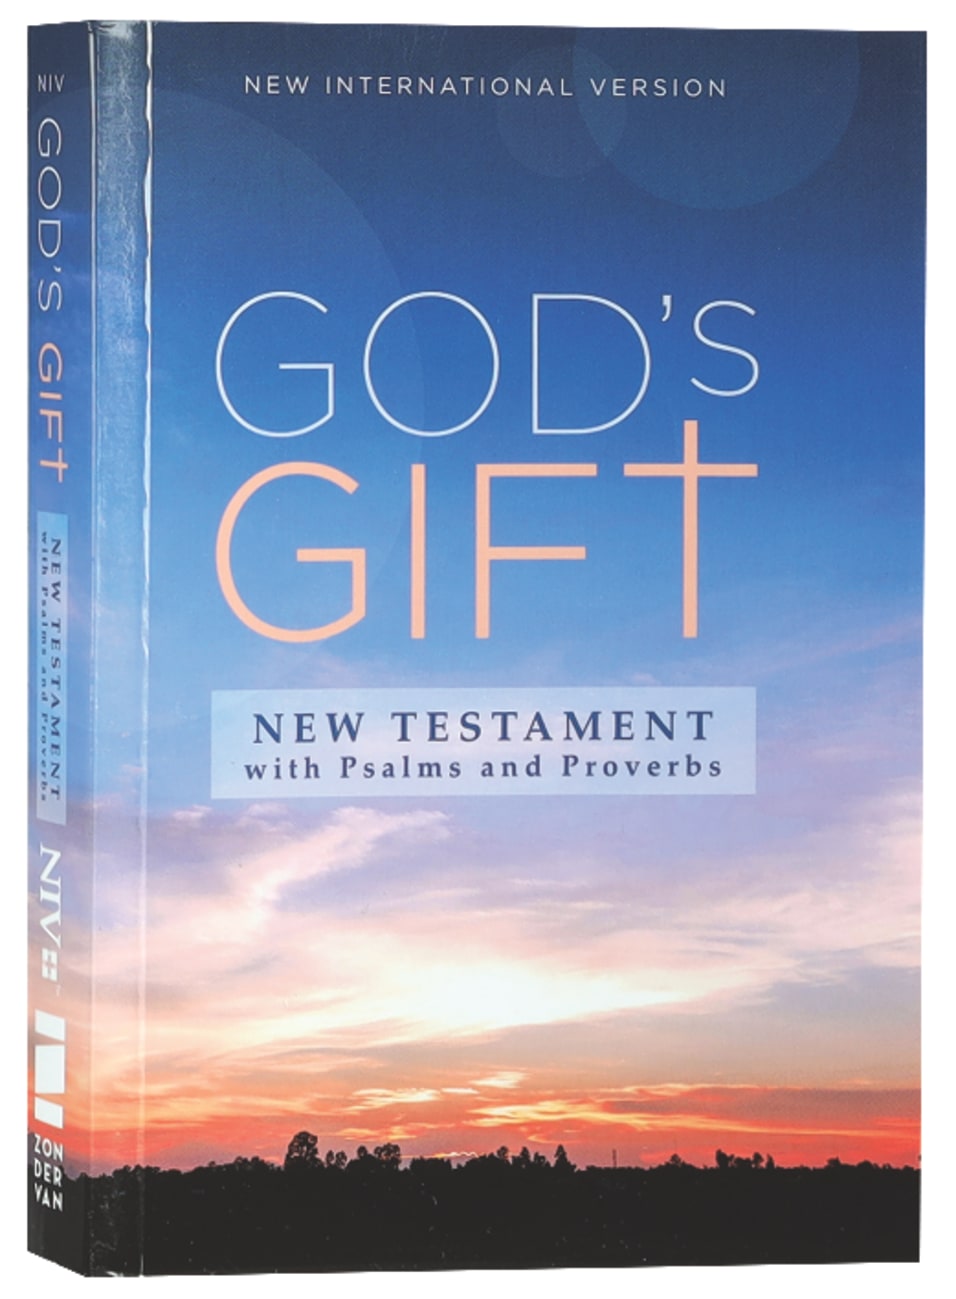 B NIV GOD'S GIFT POCKET NEW TESTAMENT WITH PSALMS AND PROVERBS COMFORT PRINT EDITION